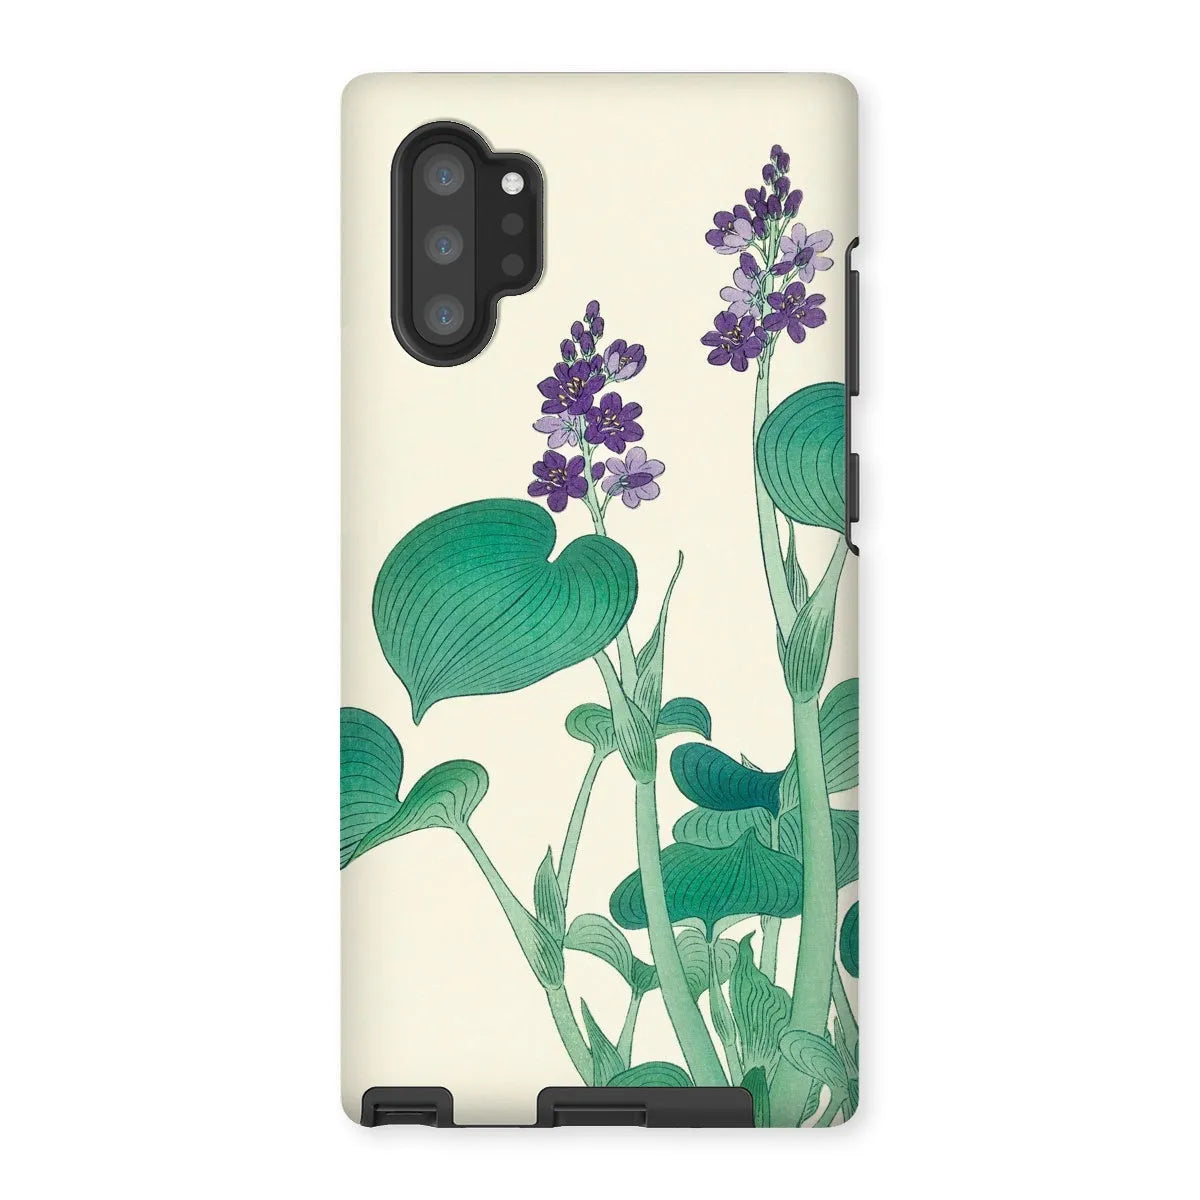 Blooming Hosta - Floral Aesthetic Art Phone Case - Ohara Koson - Samsung Galaxy Note 10p / Matte - Mobile Phone Cases